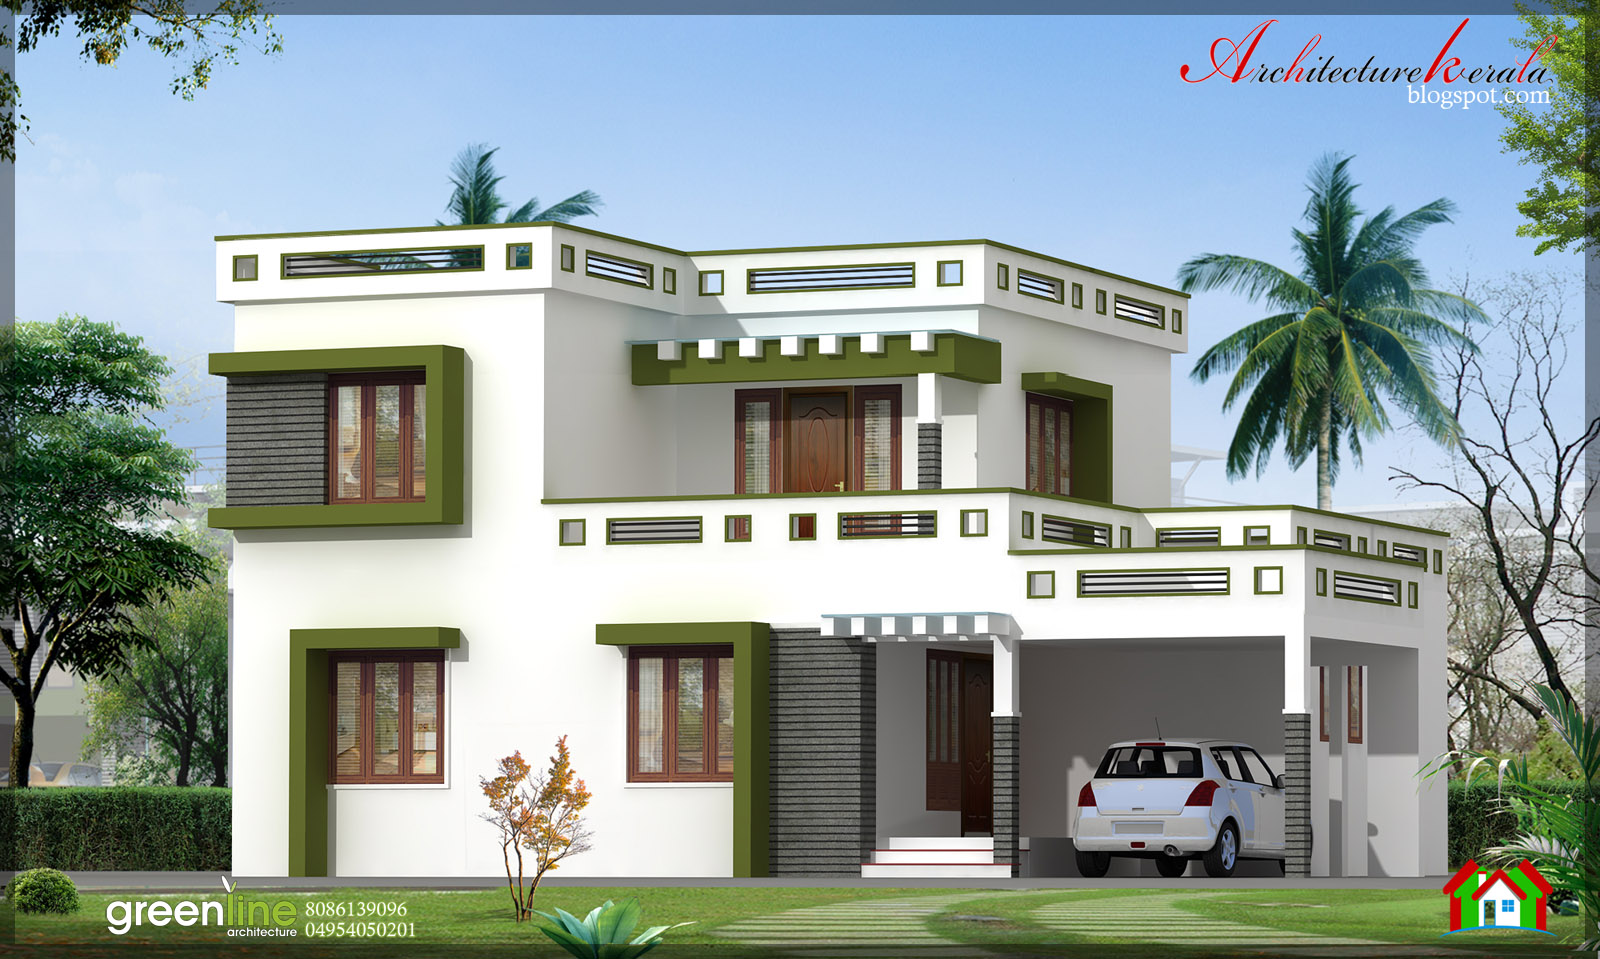 Architecture Kerala: 3 BHK NEW MODERN STYLE KERALA HOME DESIGN IN 1700 